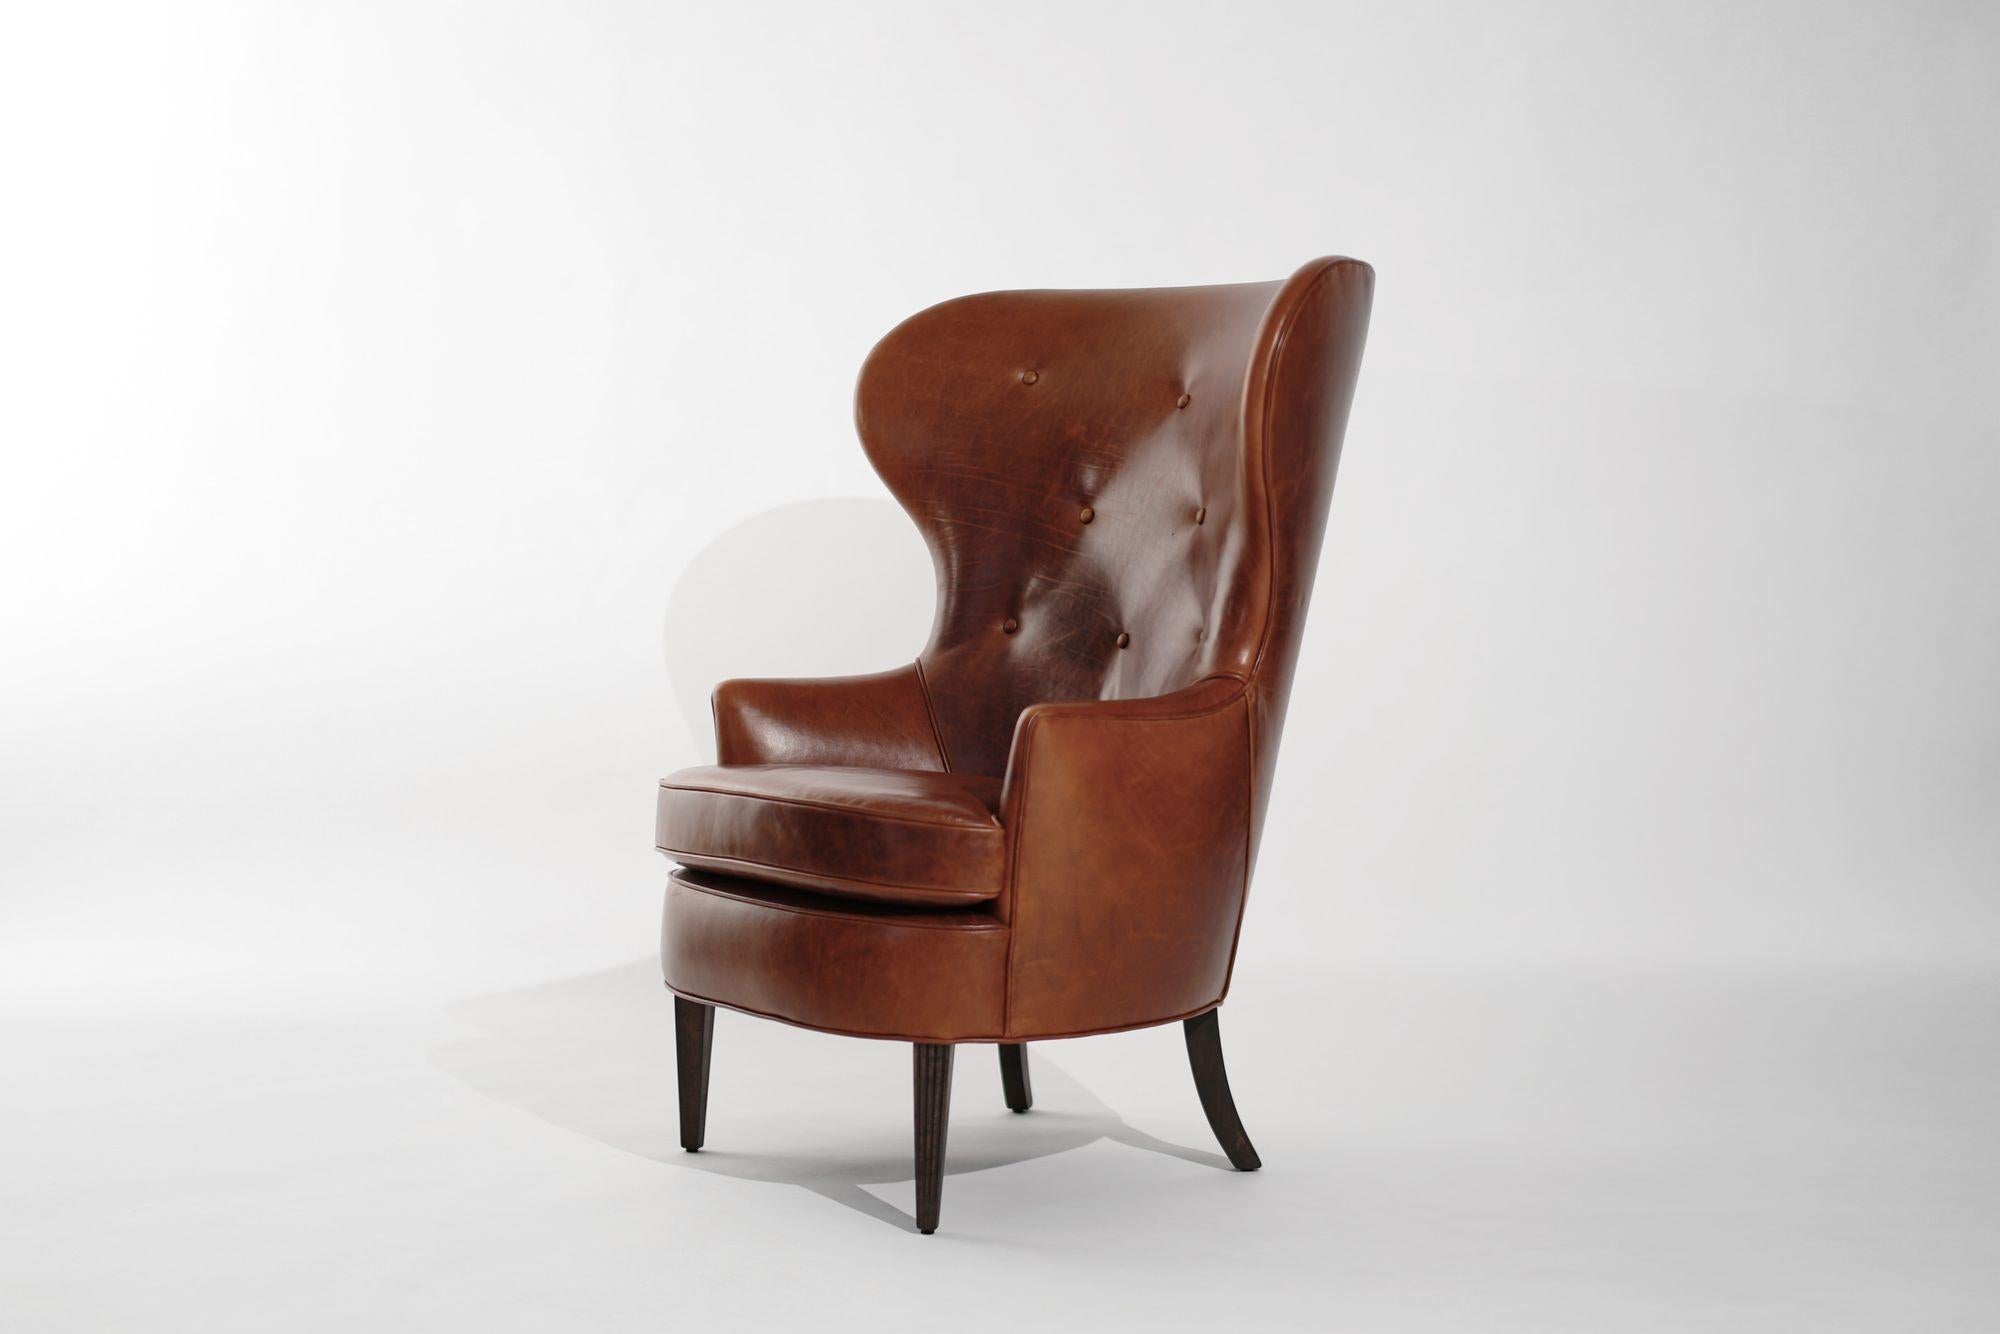 Step into mid-century luxury with our meticulously restored Vintage Wingback Chair, reminiscent of Edward Wormley's iconic style for Dunbar in the 1950s. Painstakingly revived and reupholstered in sumptuous cognac leather, this classic piece exudes